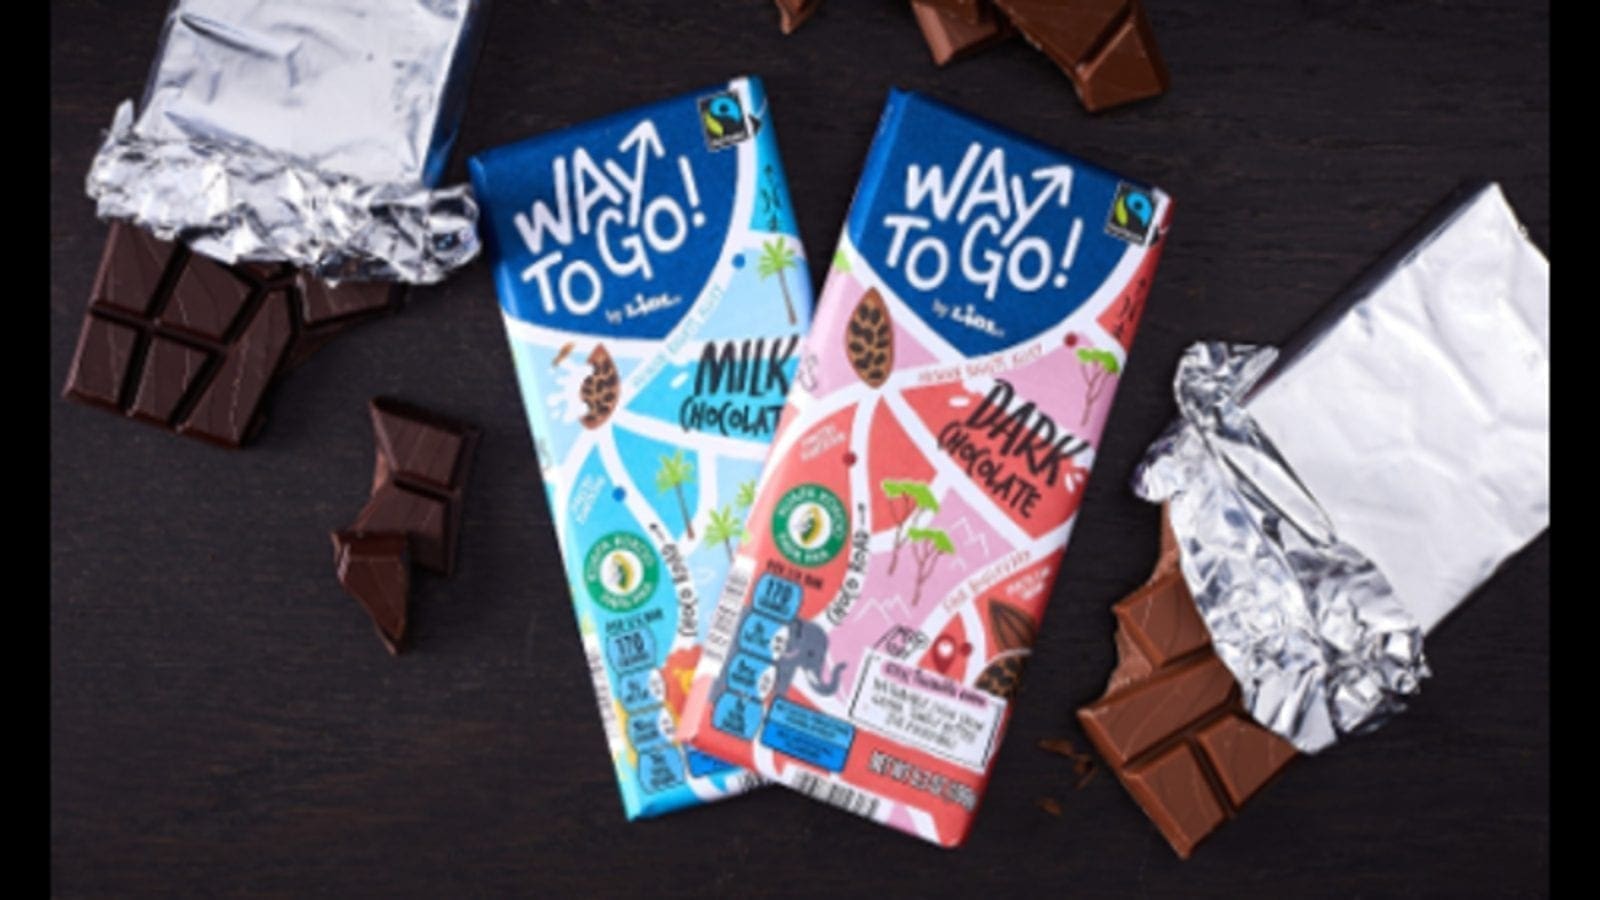 Multinational grocery retailer Lidl introduces new sustainably sourced chocolate bar in US stores